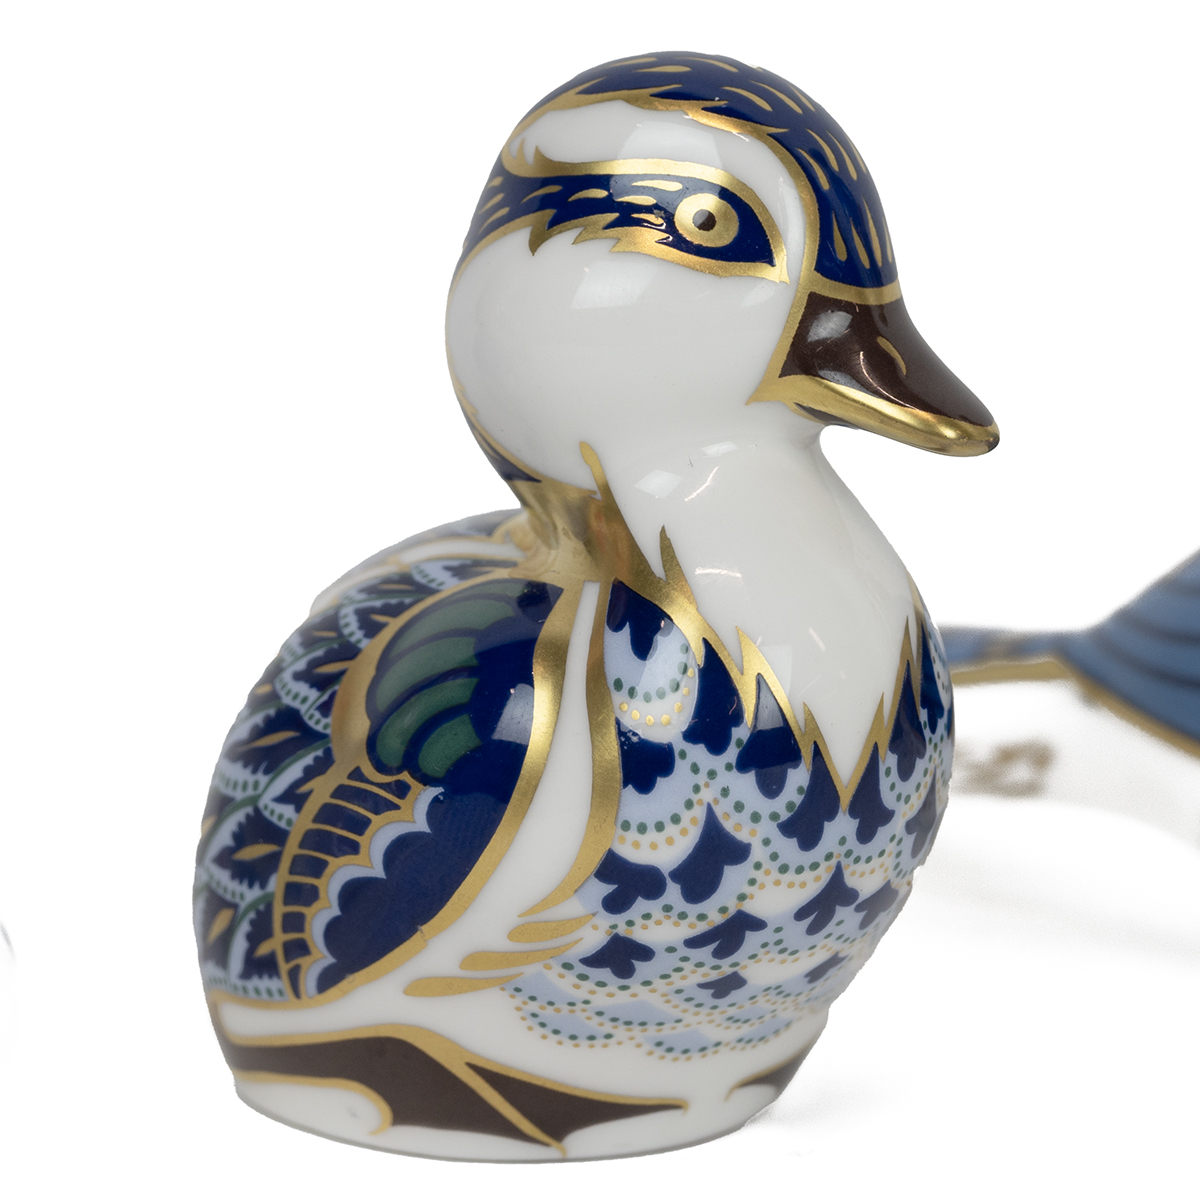 Porcelain figurines to include: Royal Crown Derby paperweights - Duckling (Gold Stopper) and Blue... - Image 2 of 5